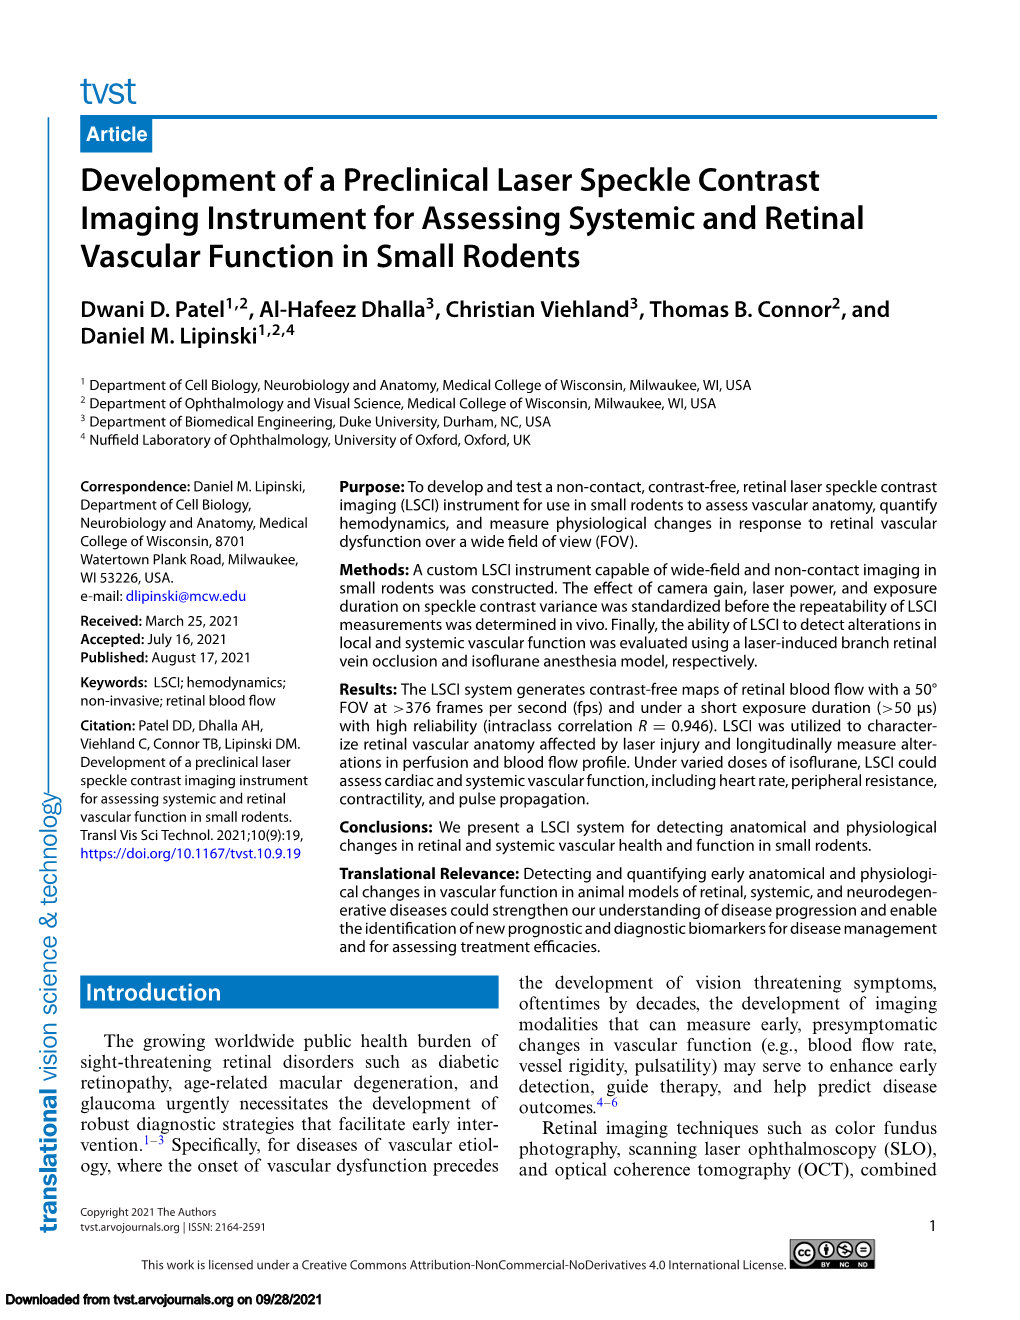 Development of a Preclinical Laser Speckle Contrast Imaging Instrument for Assessing Systemic and Retinal Vascular Function in Small Rodents